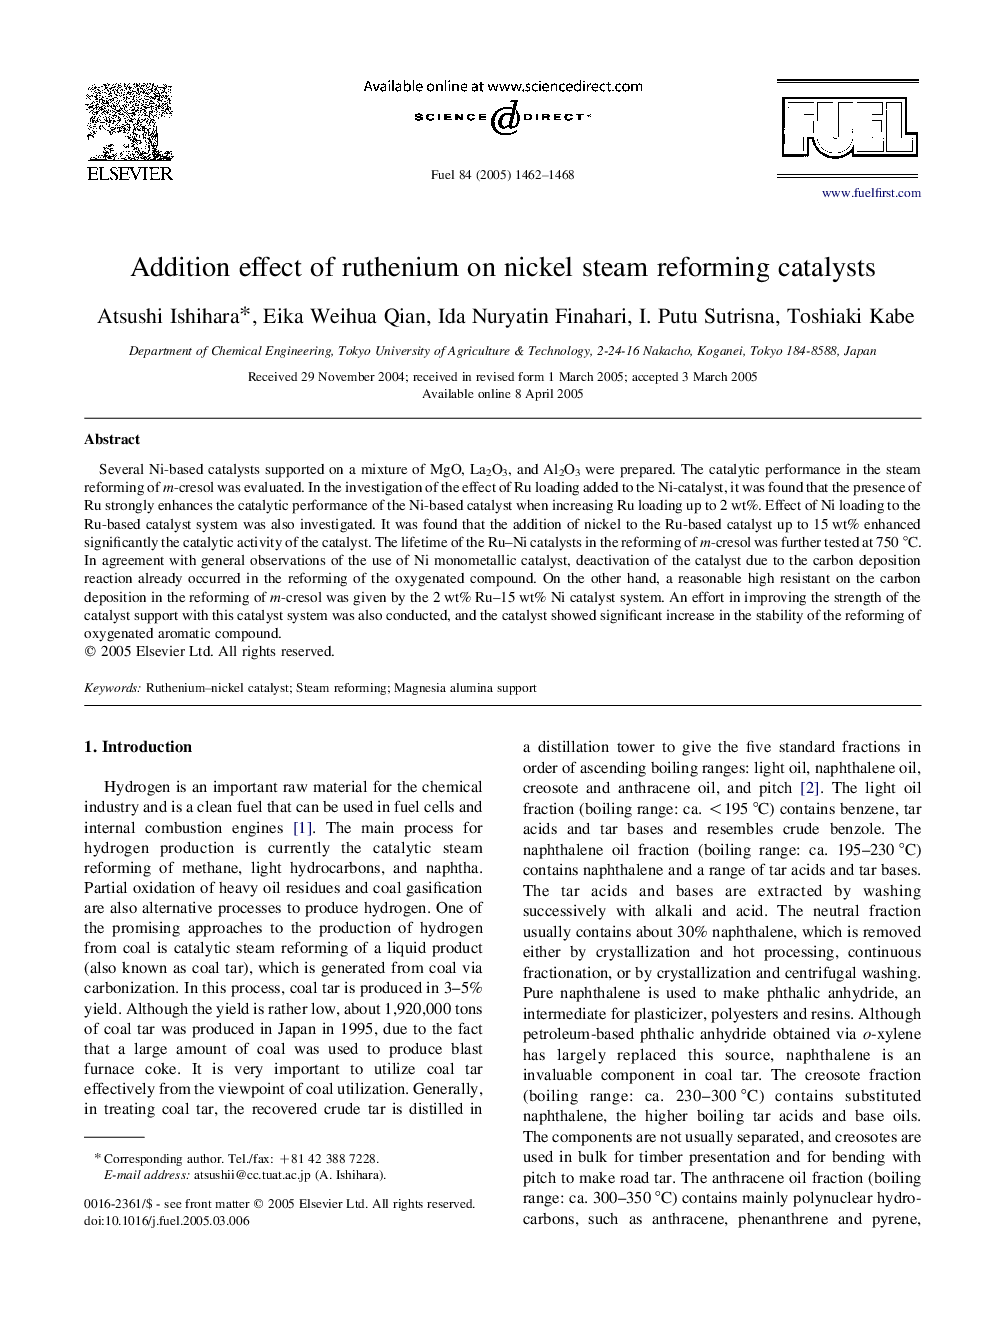 Addition effect of ruthenium on nickel steam reforming catalysts